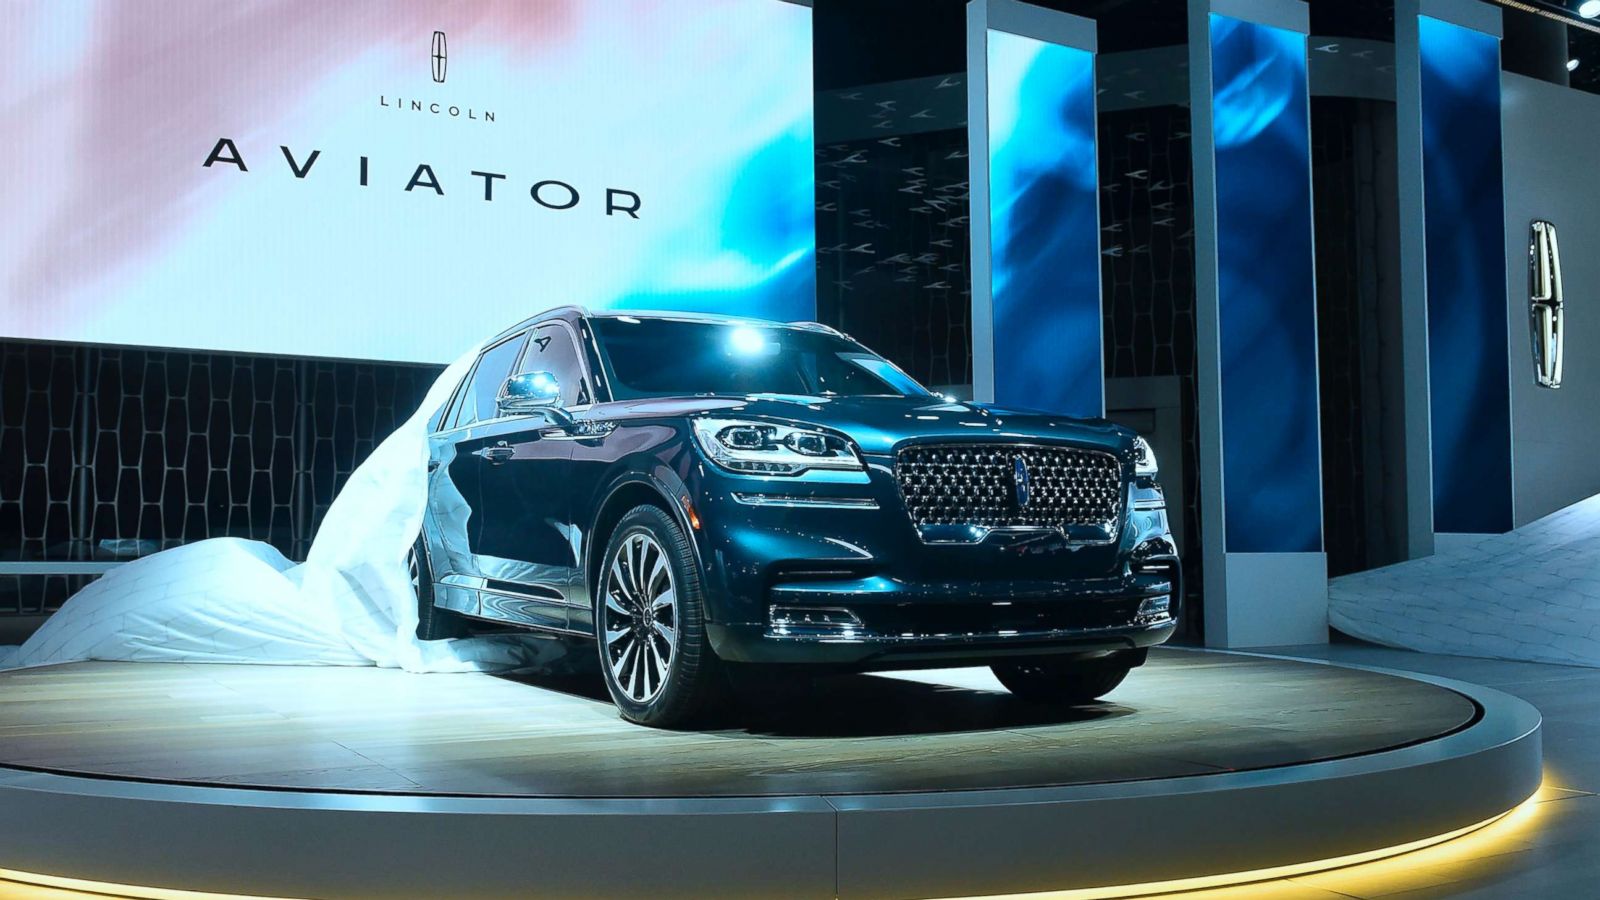 Hot new SUVs could put Lincoln back in the luxury game with American  drivers - ABC News